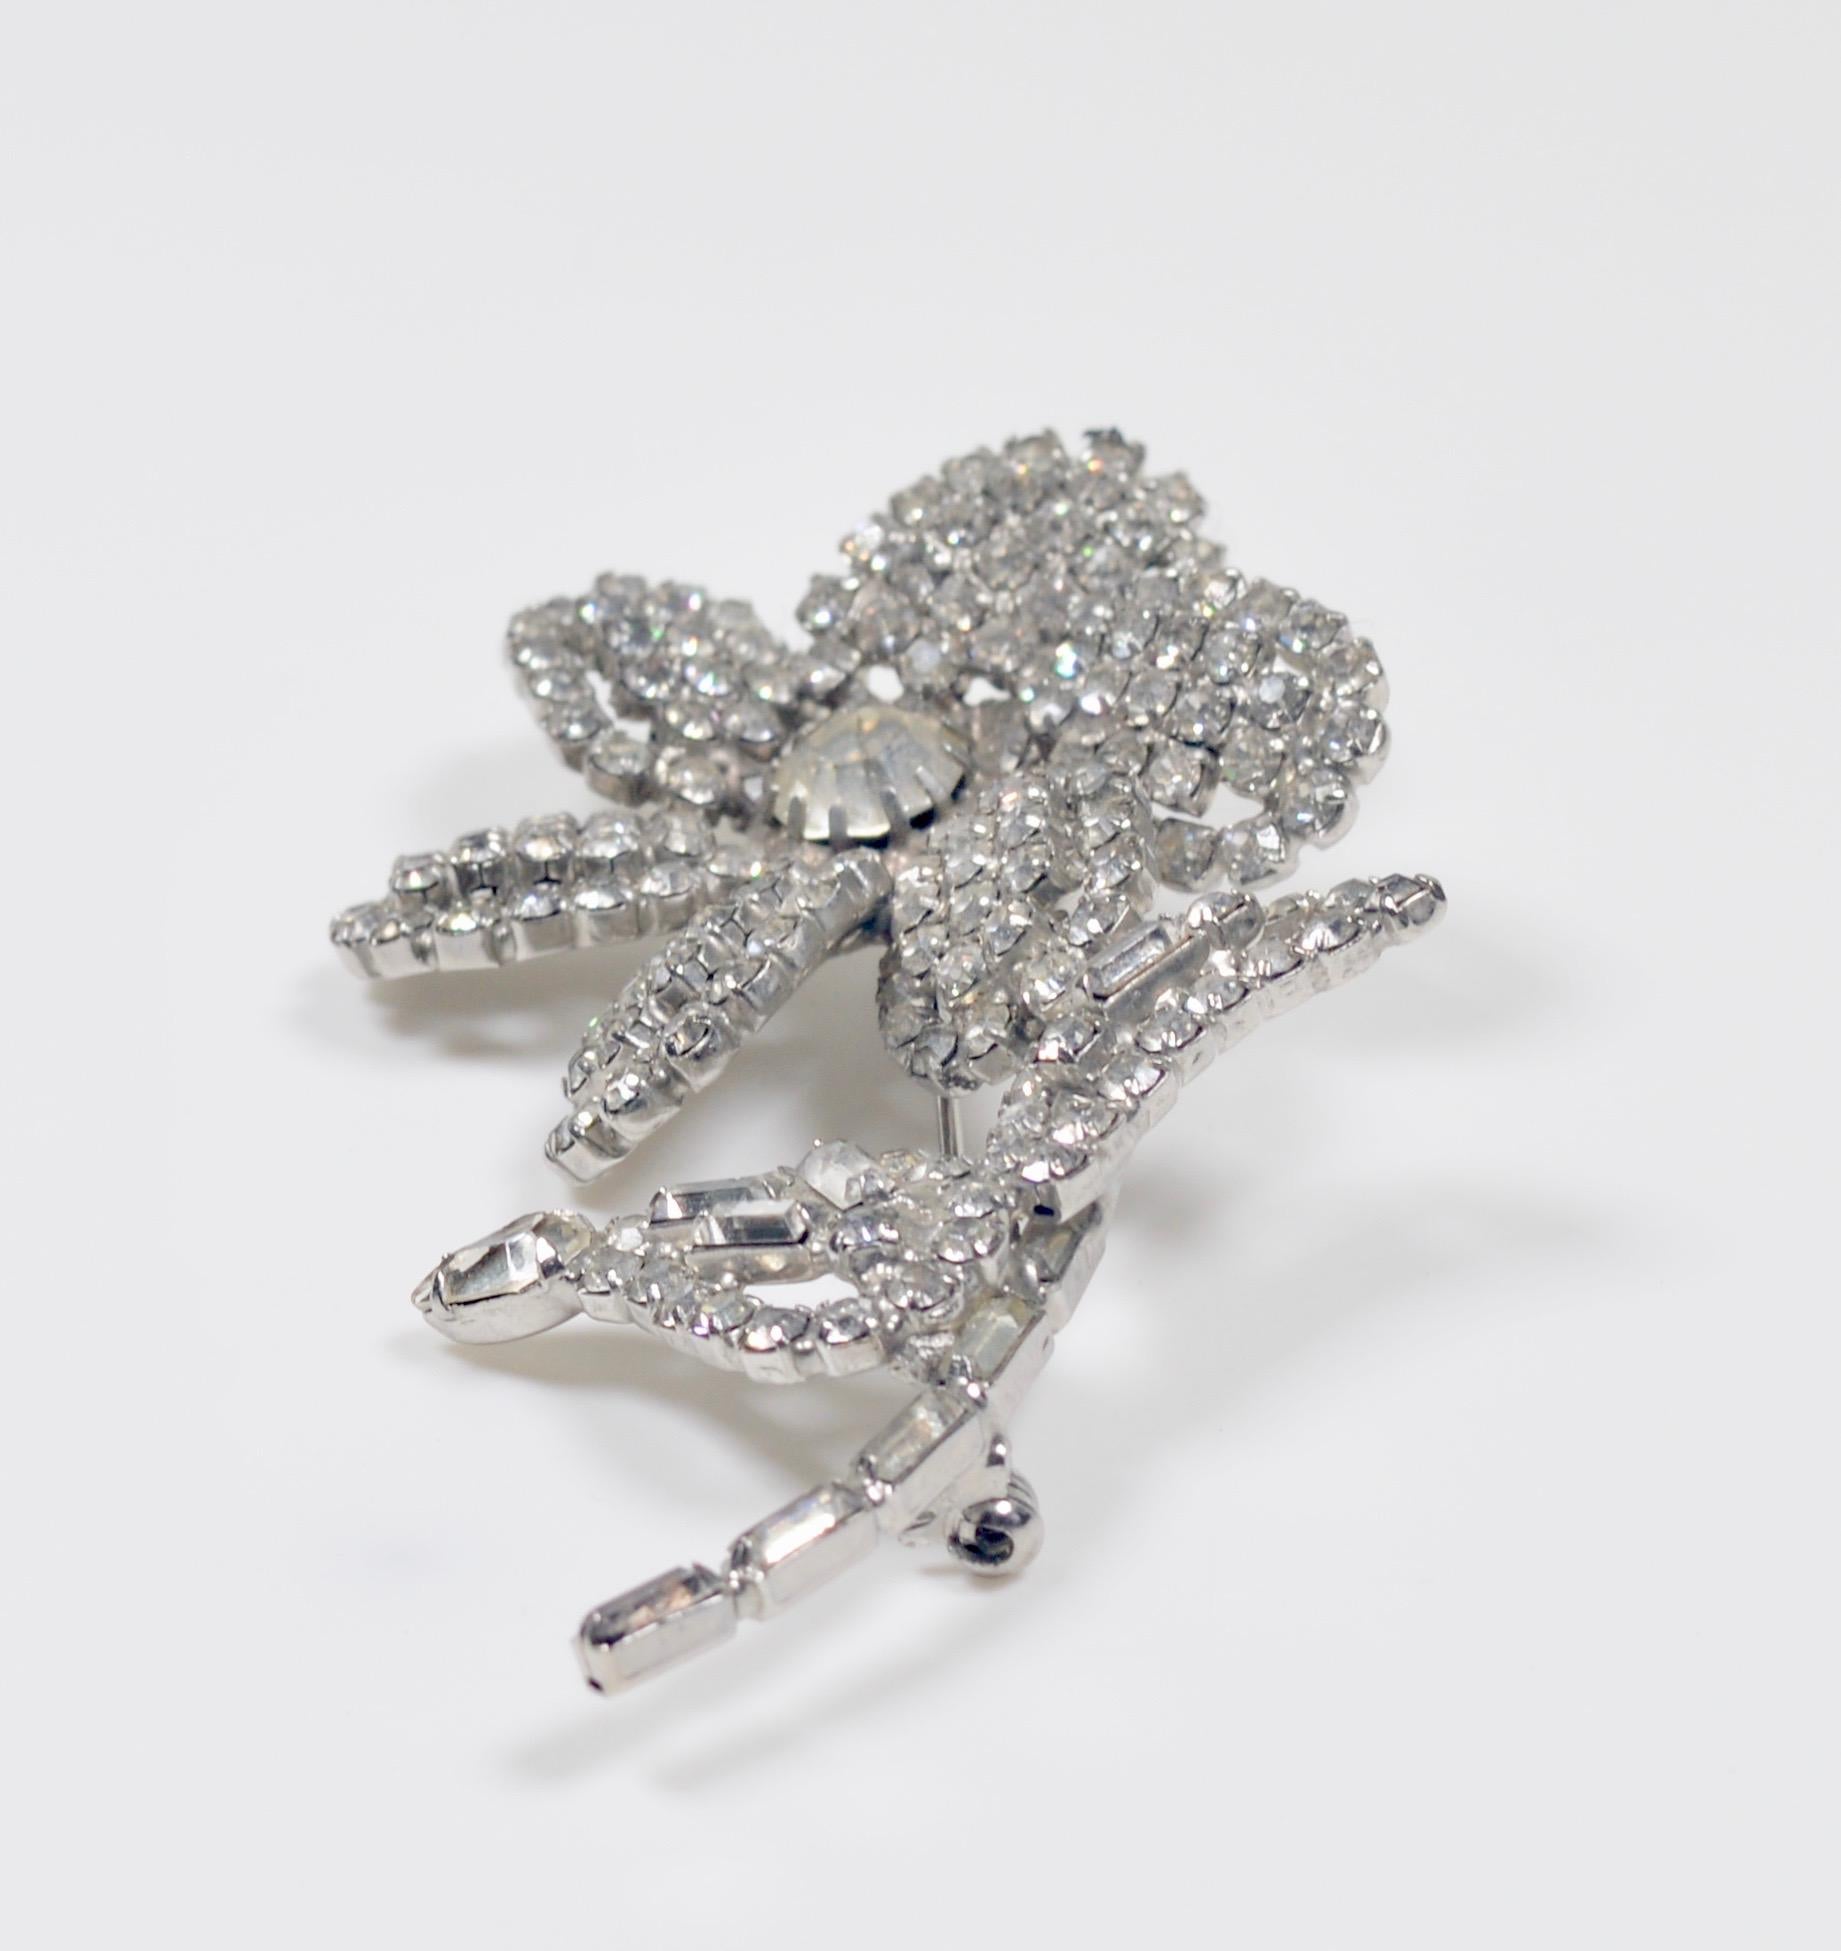 A very beautiful of fine quality rhinestone brooch on silver depicting a flower stem with two leaves